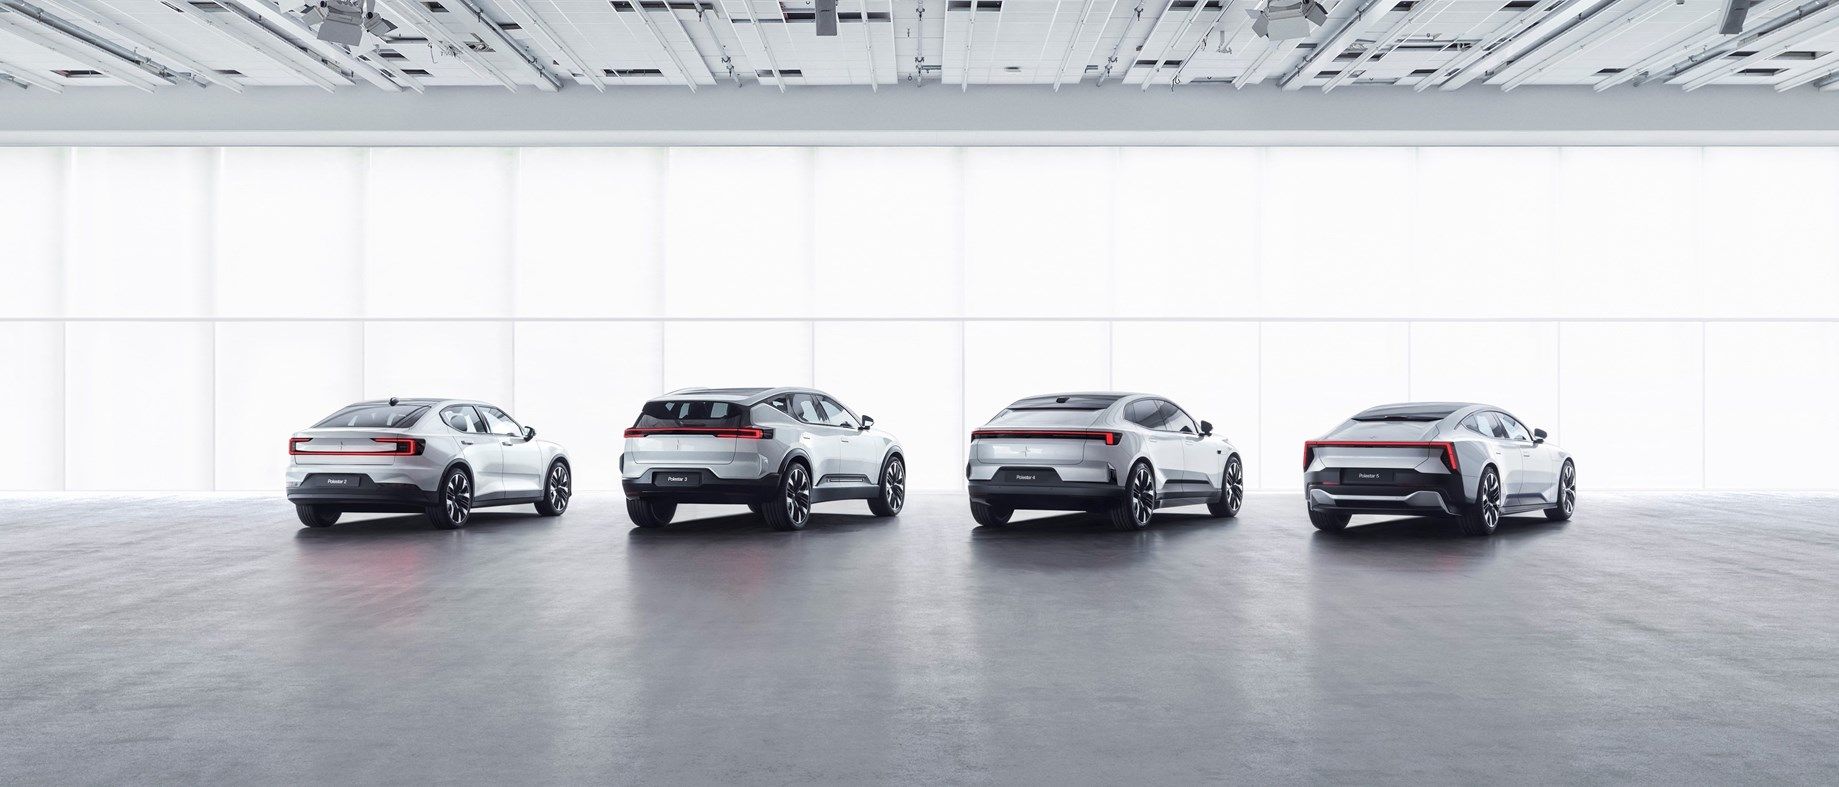 Polestar achieves record deliveries in the second quarter, growing 36% year-on-year